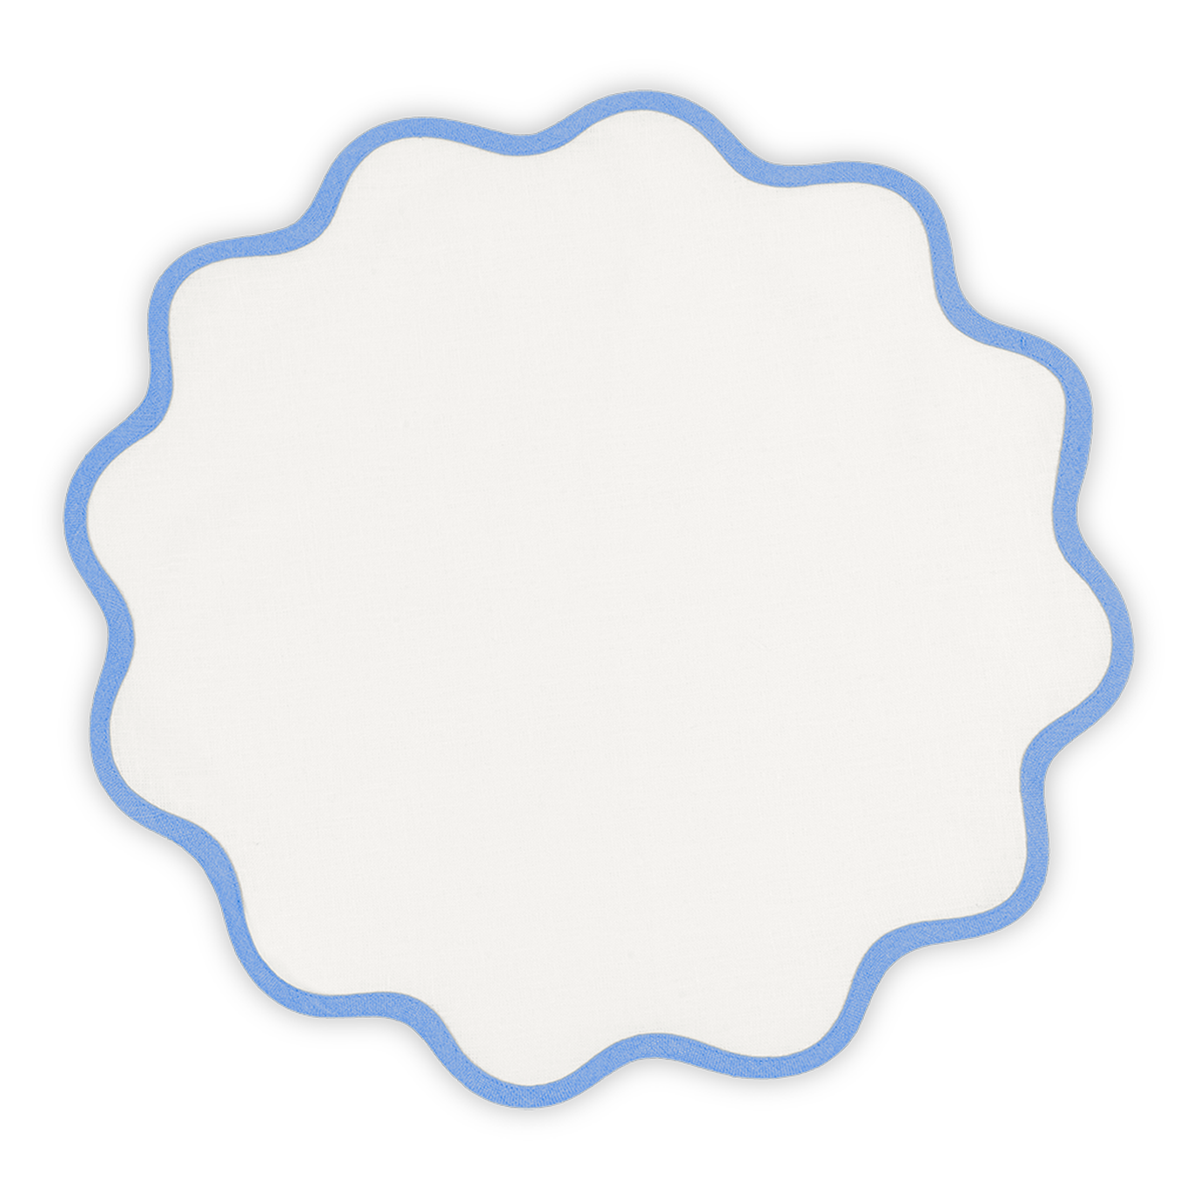 Silo Image of Matouk Scallop Edge Circle Placemat in Color Sky Blue